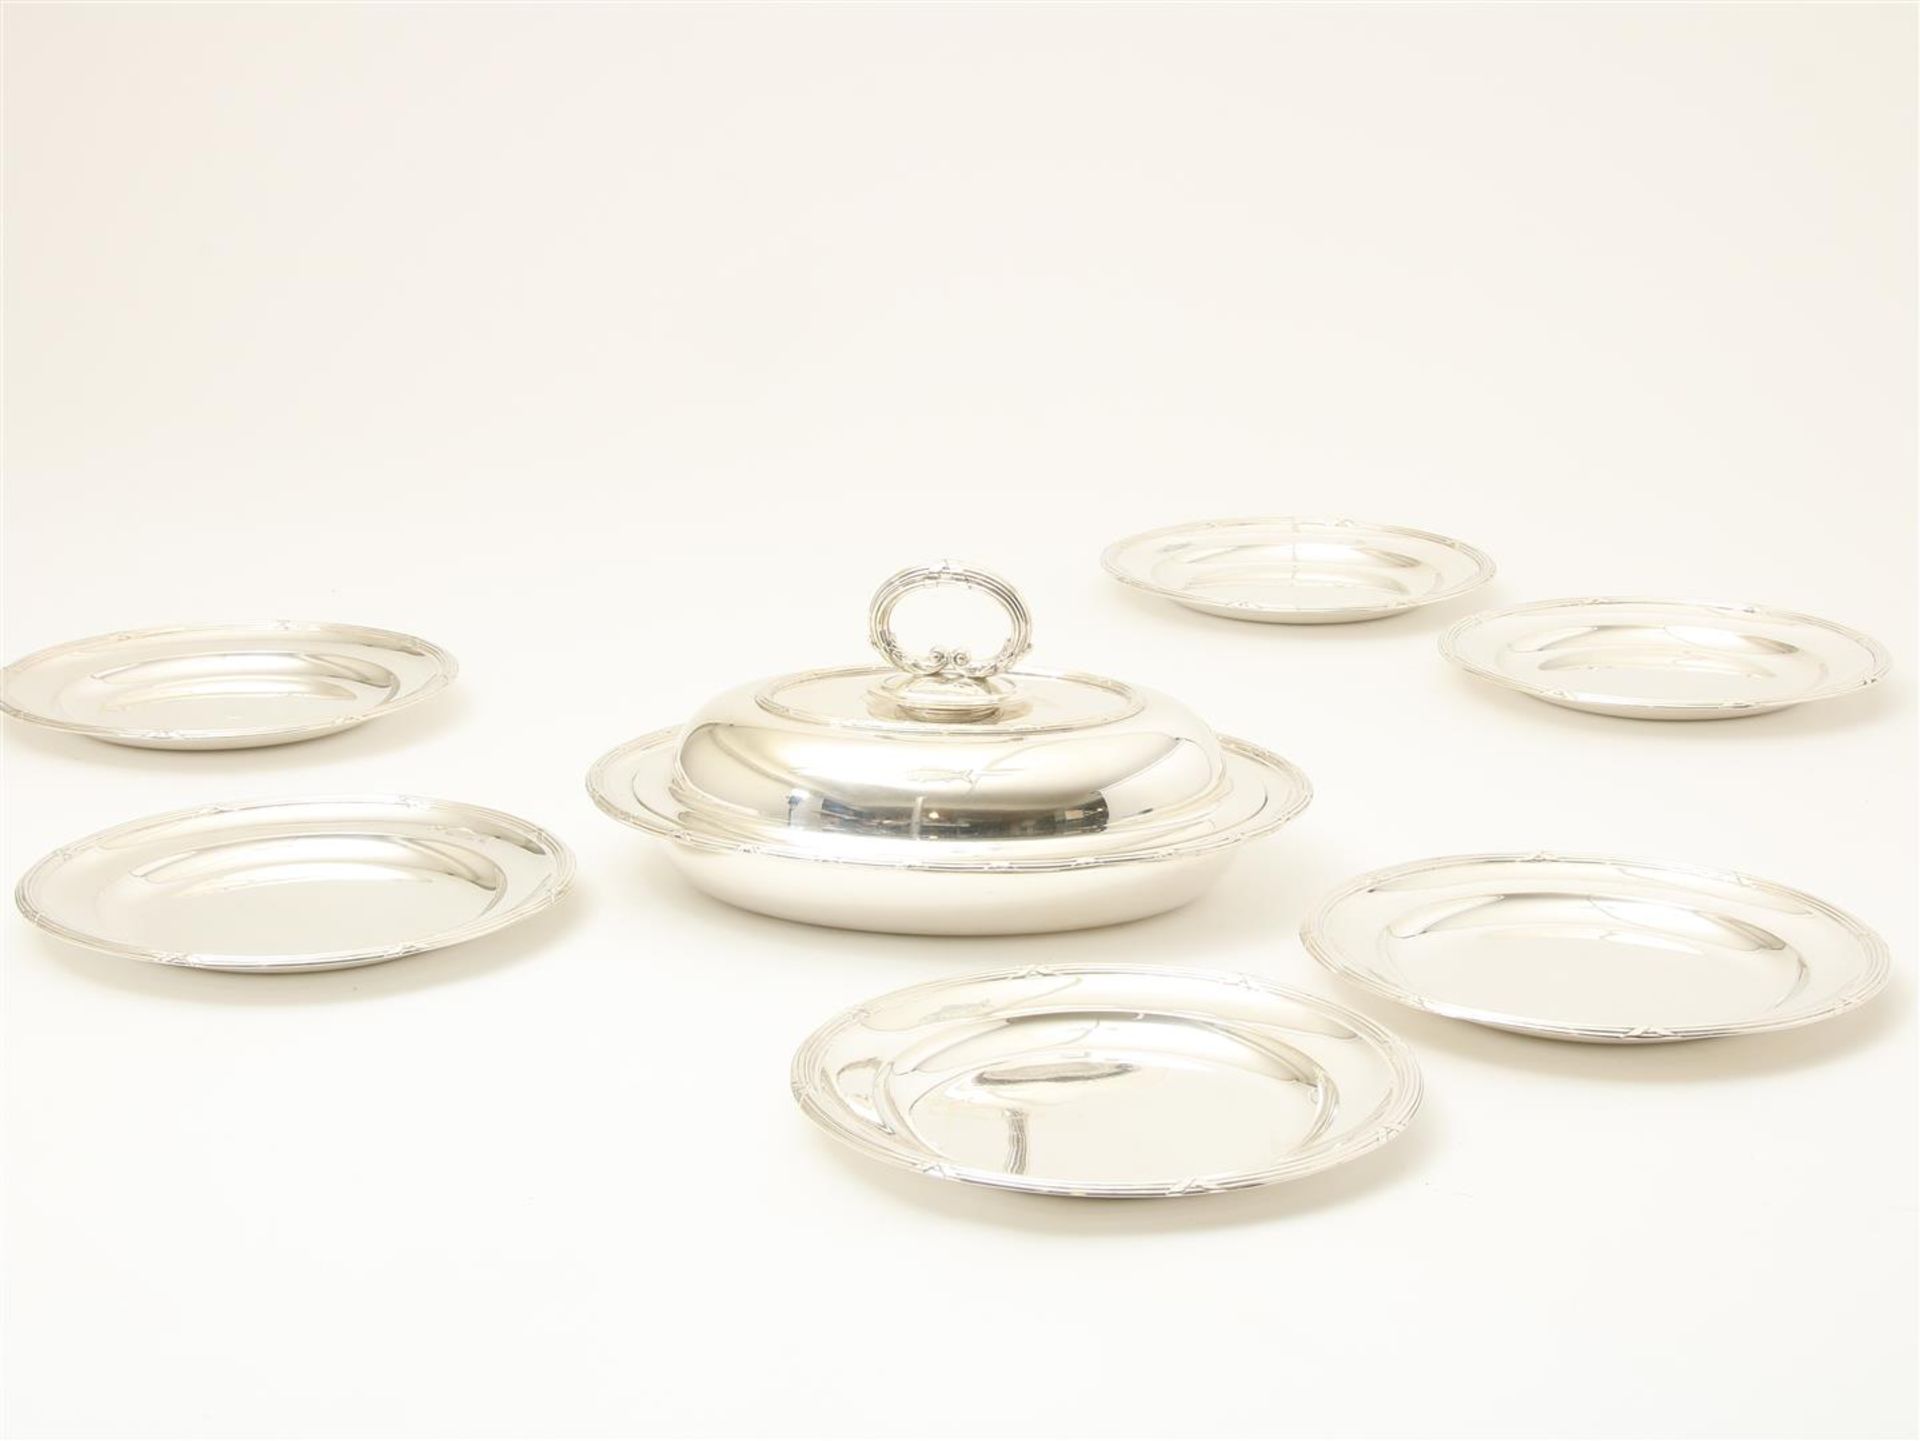 Set including silver terrine (oval covered dish 33x 25 cm under lid) with removable handle, - Image 2 of 4